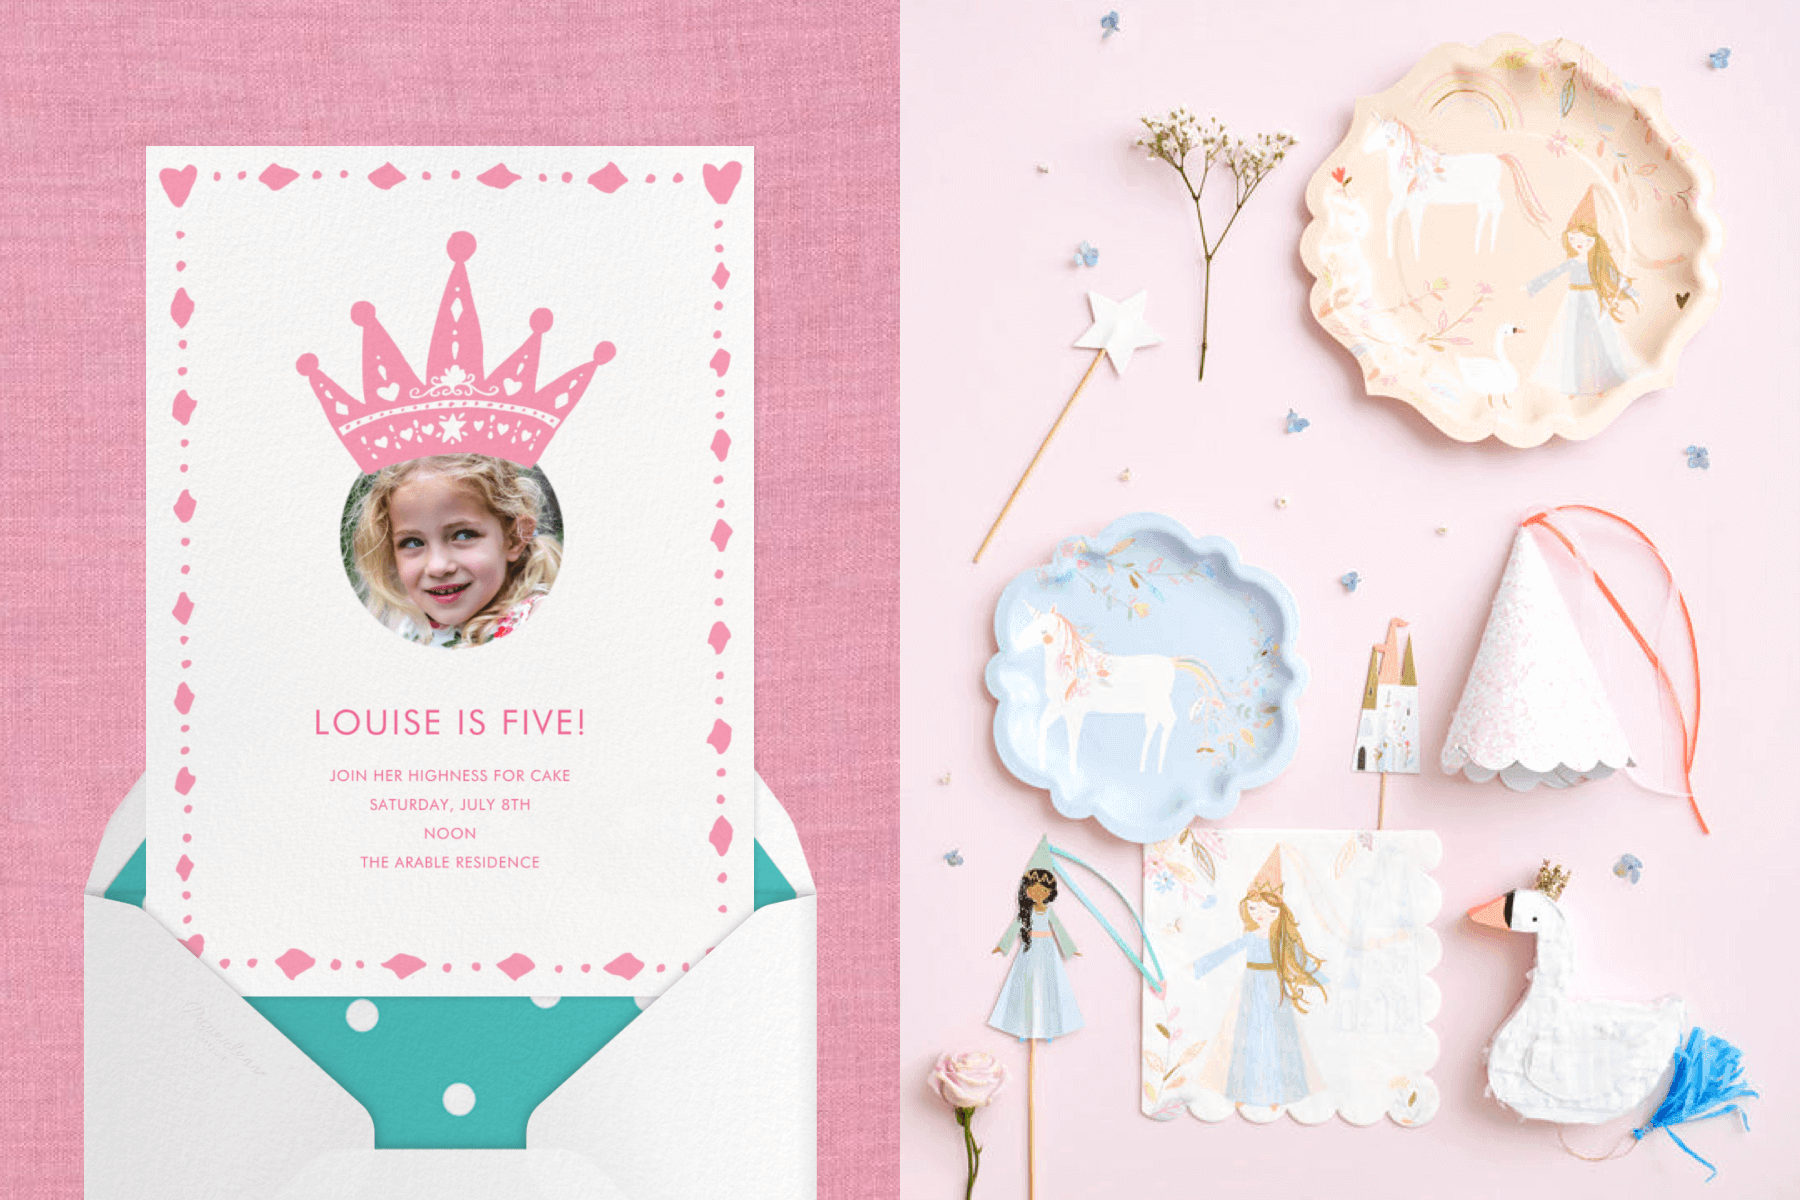 An invitation with a small photo of a girl and a pink crown illustration above it; princess-themed party plates and cake toppers.